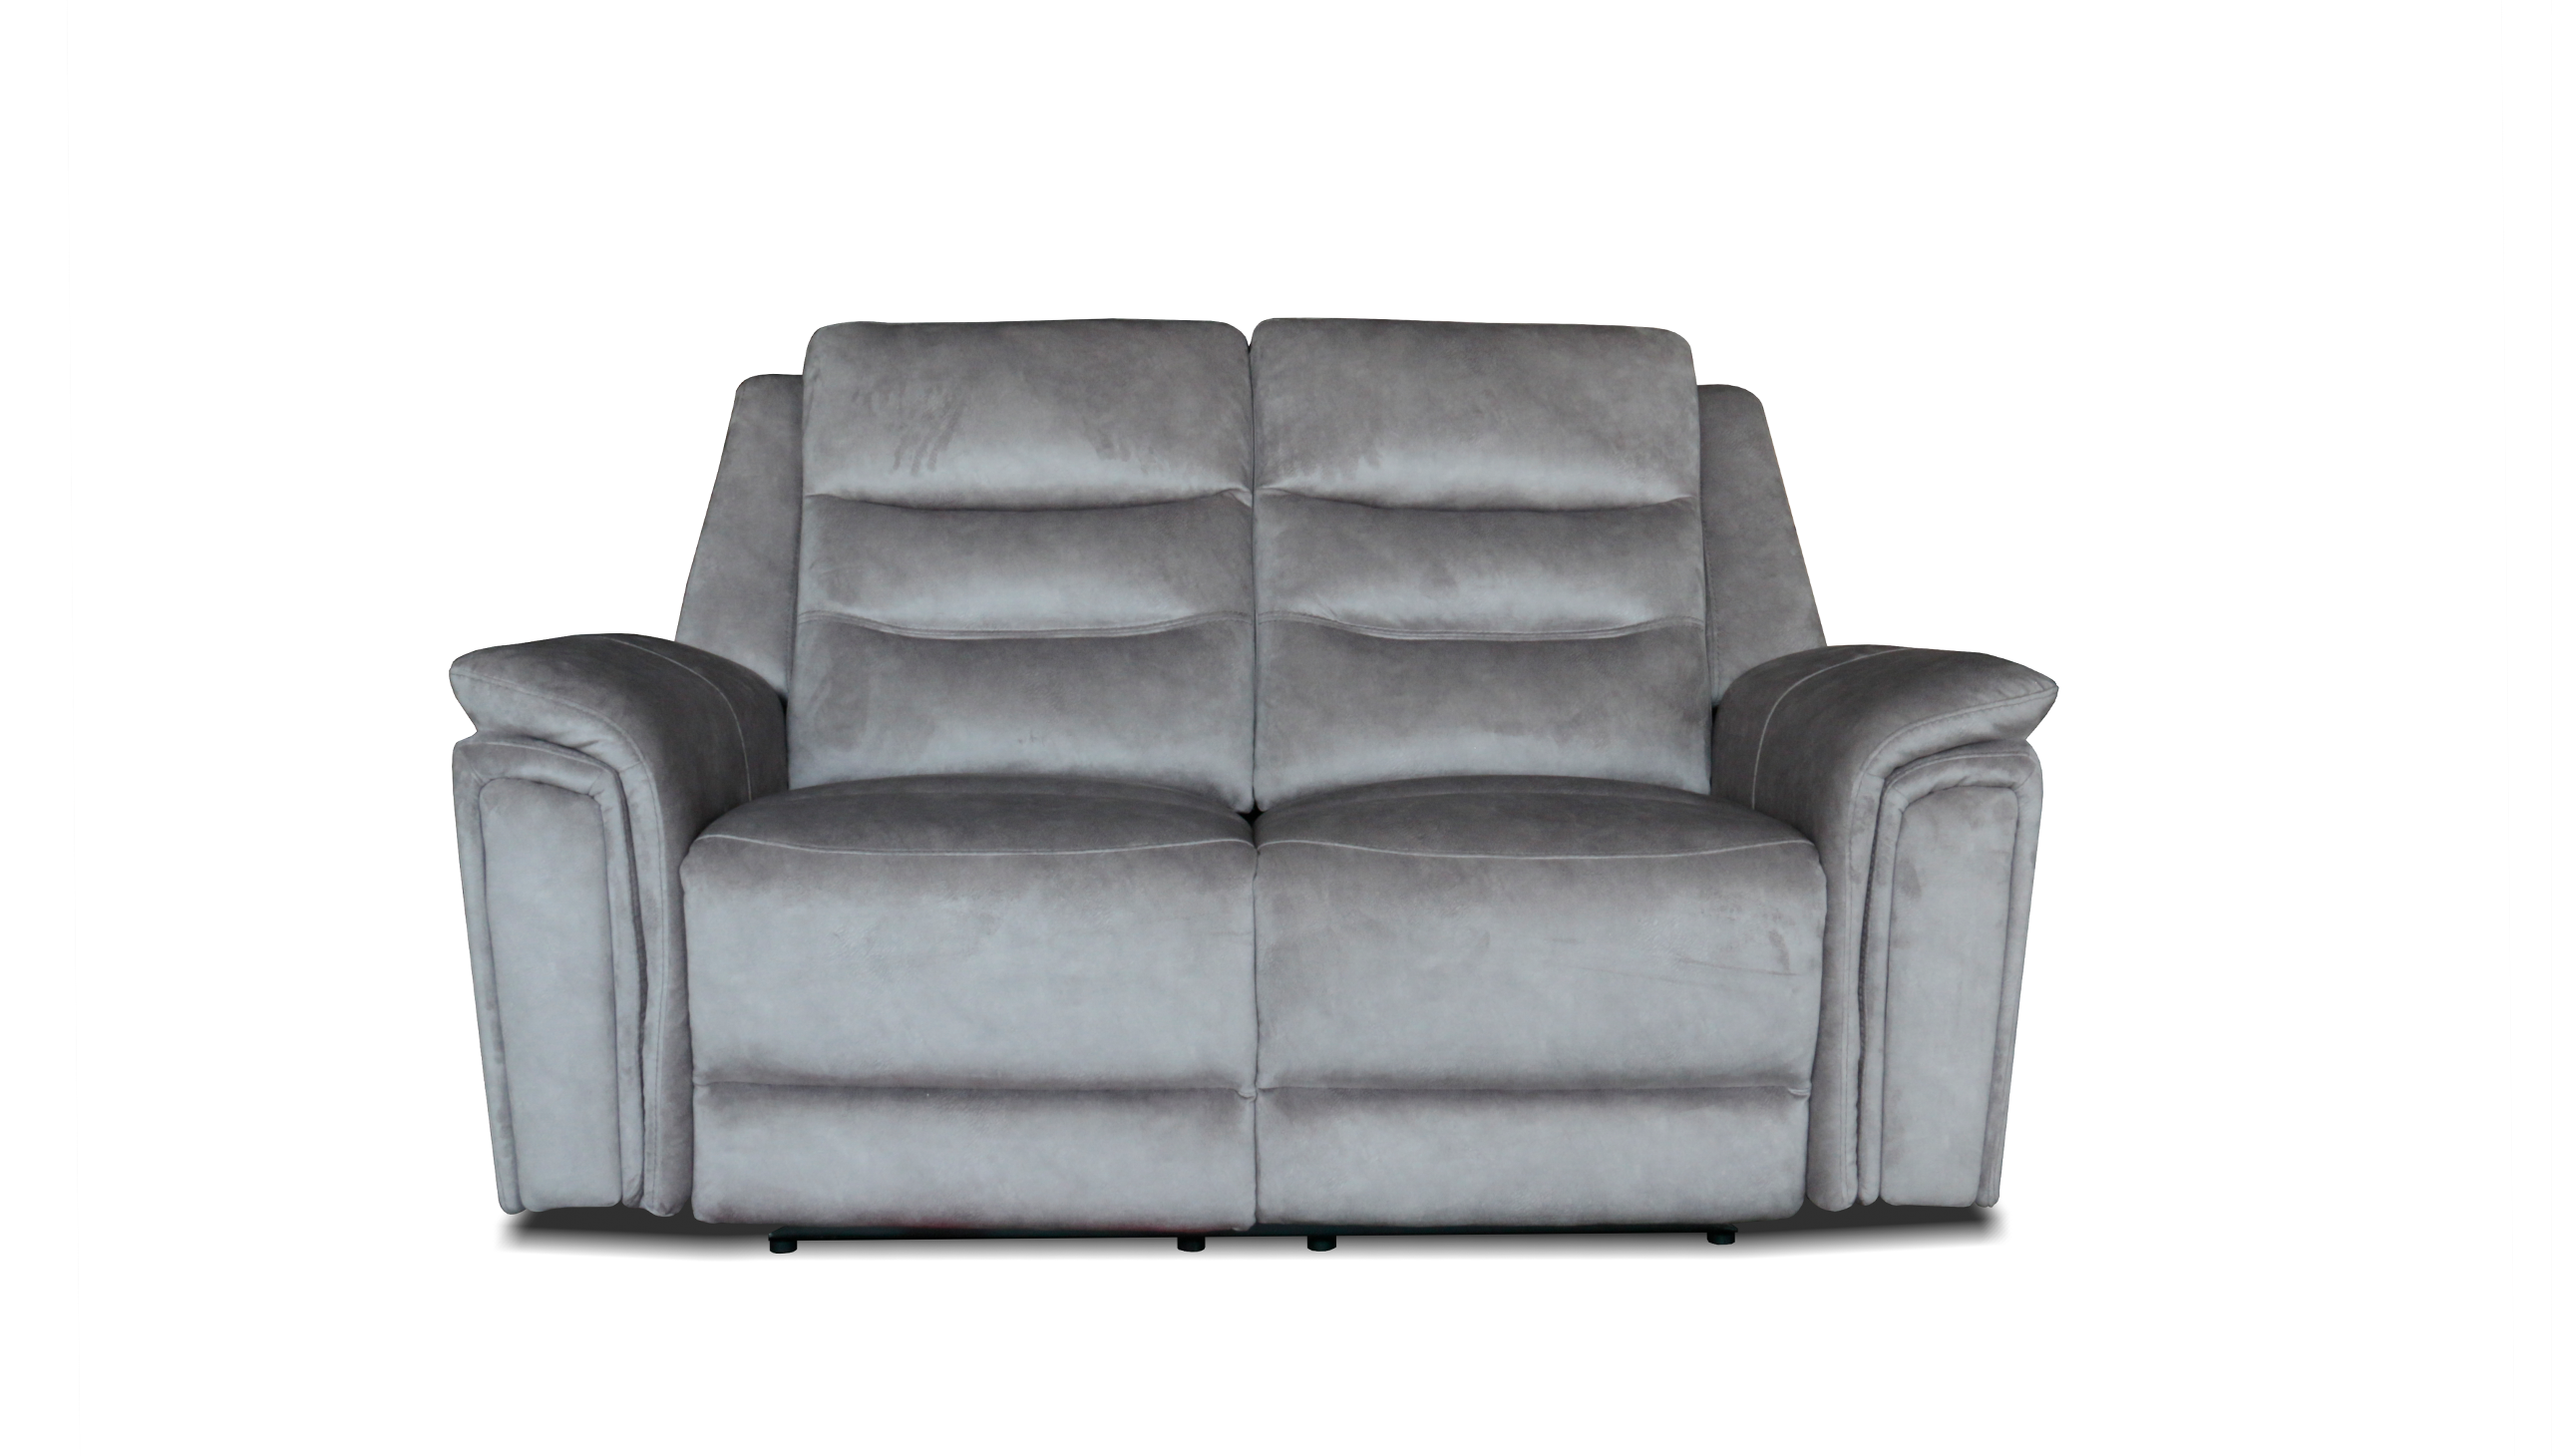 Legend 2 Seater Power Recliner Sofa with Cup Holders - In Stock